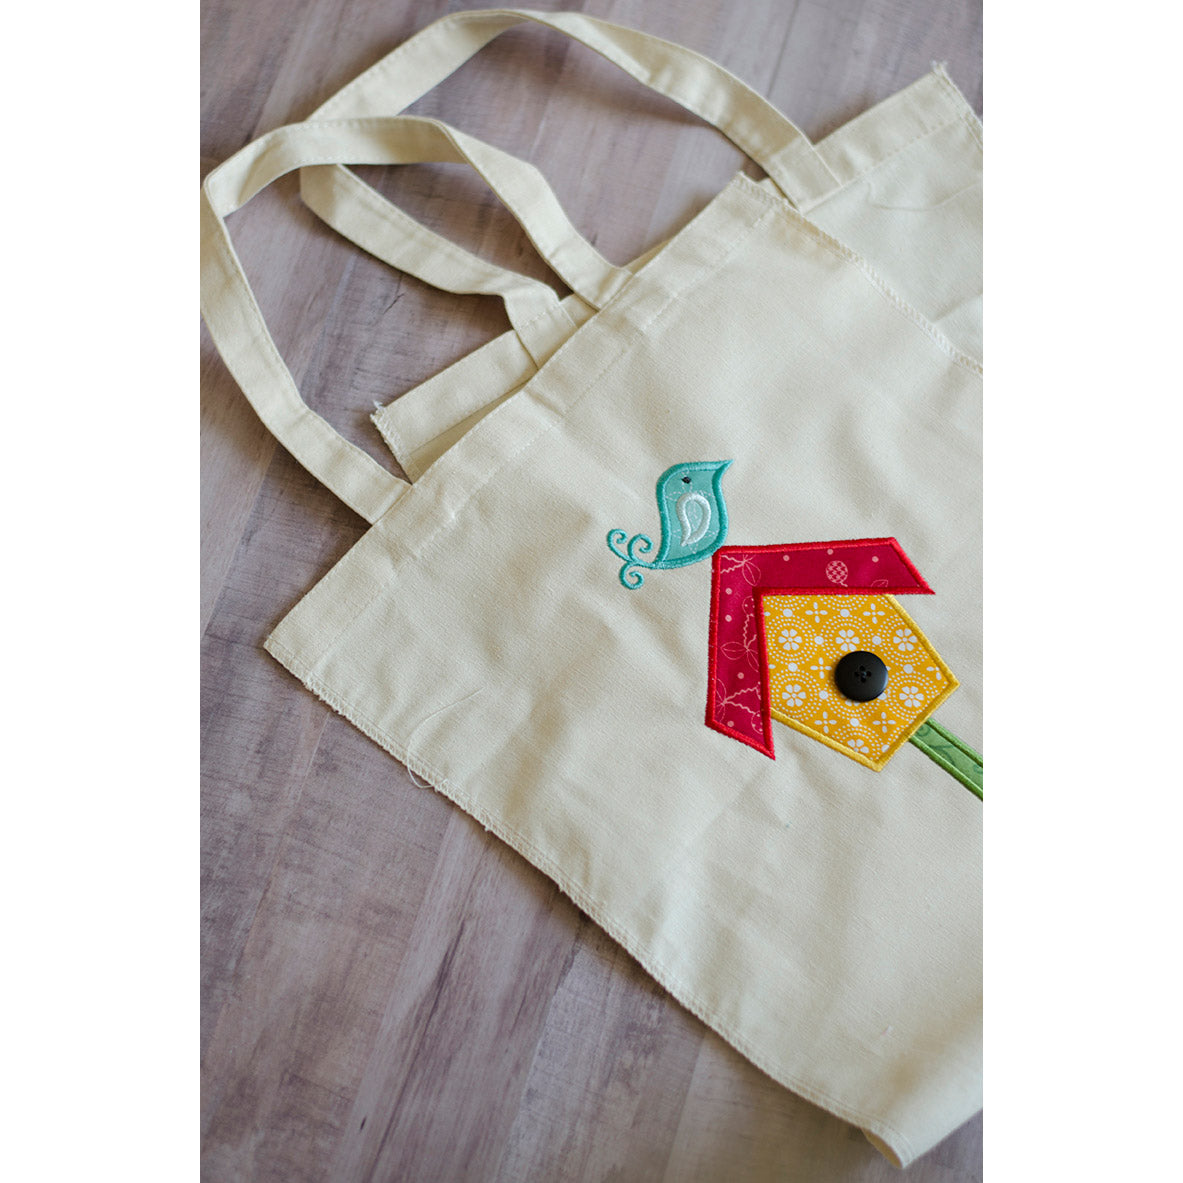 Kimberbell’s blank canvas totes (KDKB202) come without the side seams sewn up so it’s easy to hoop the bag itself, then add the adorable embroidery. The edges are serged too, so the bag won’t fray when you finish the side seams with a simple straight stitch.